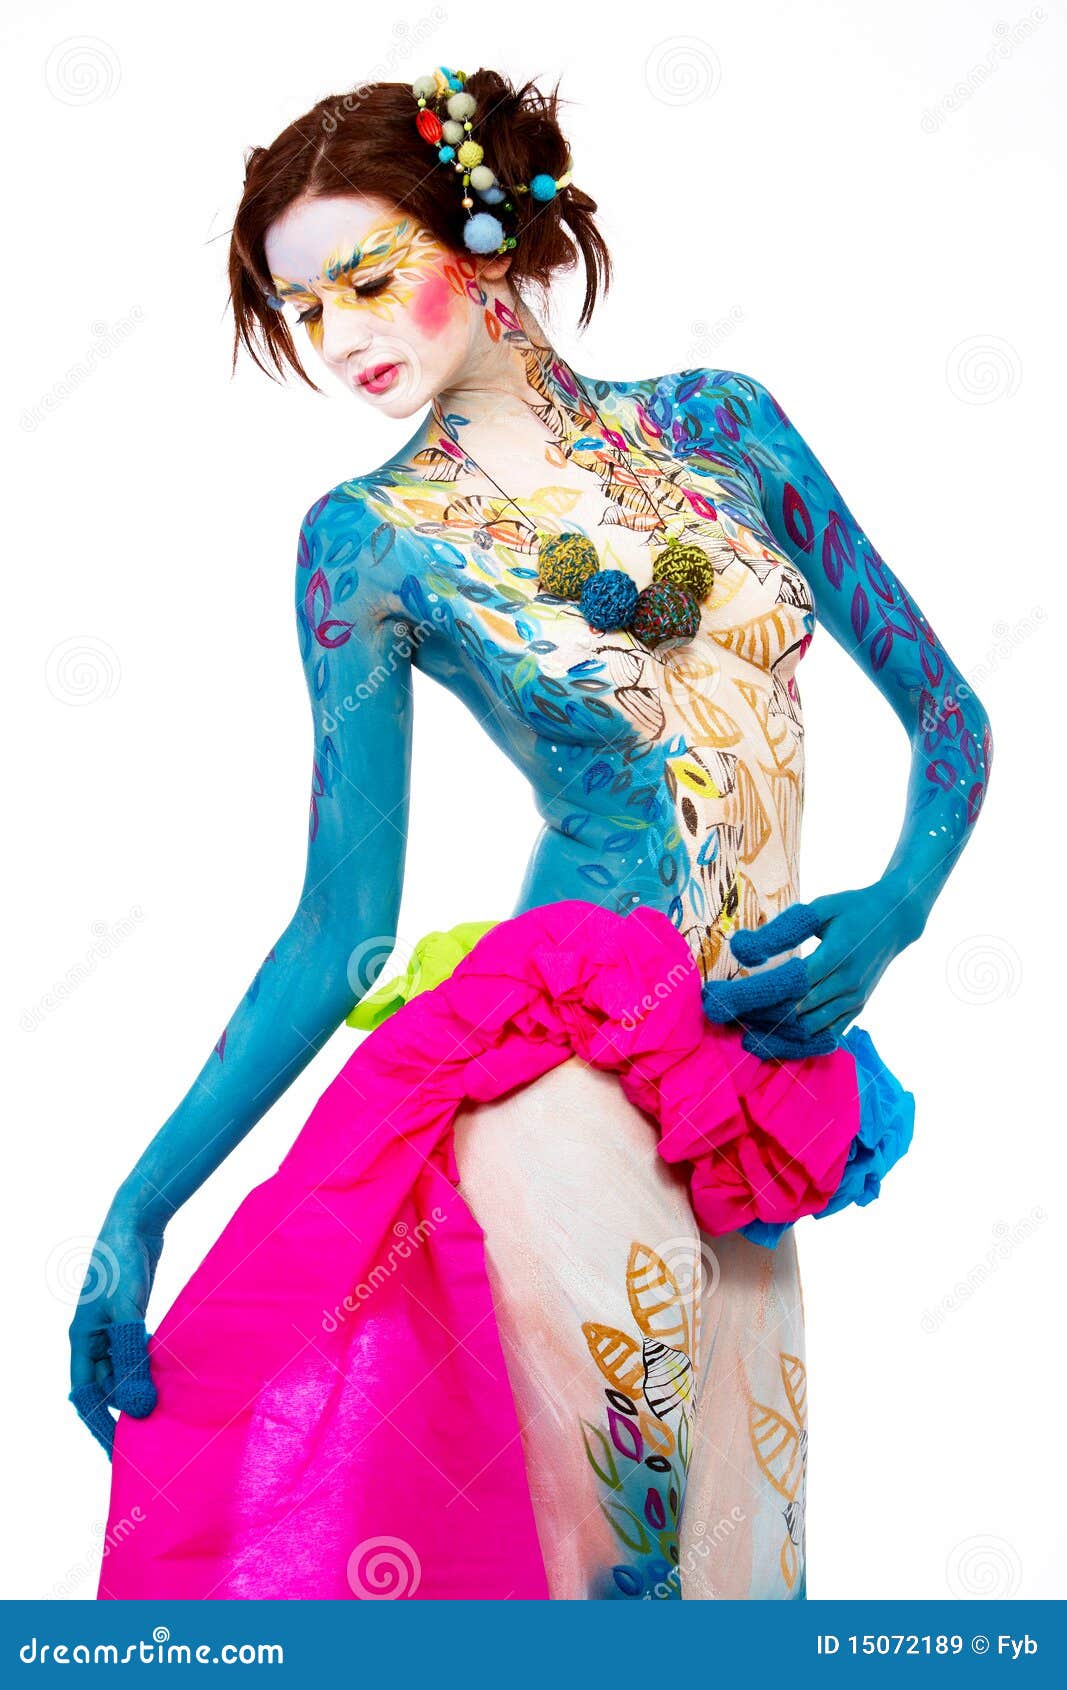 Creative Bodyart Painted On A Woman Stock Image Image